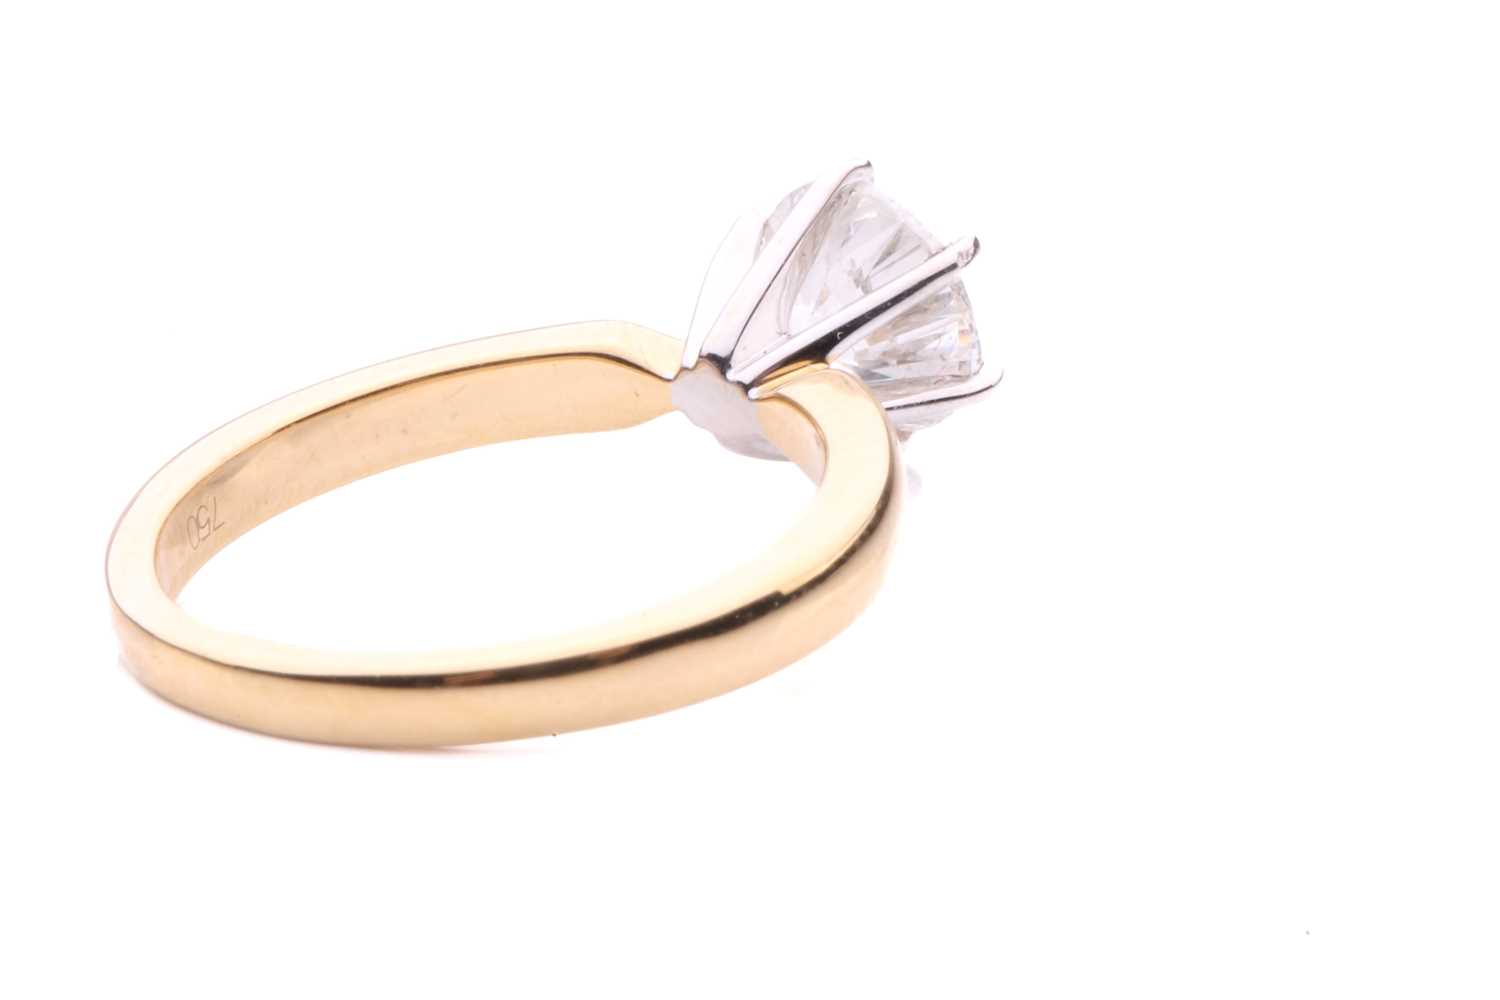 A diamond solitaire ring in 18ct gold, centred with a brilliant-cut diamond of 6.7 mm with an - Image 4 of 5